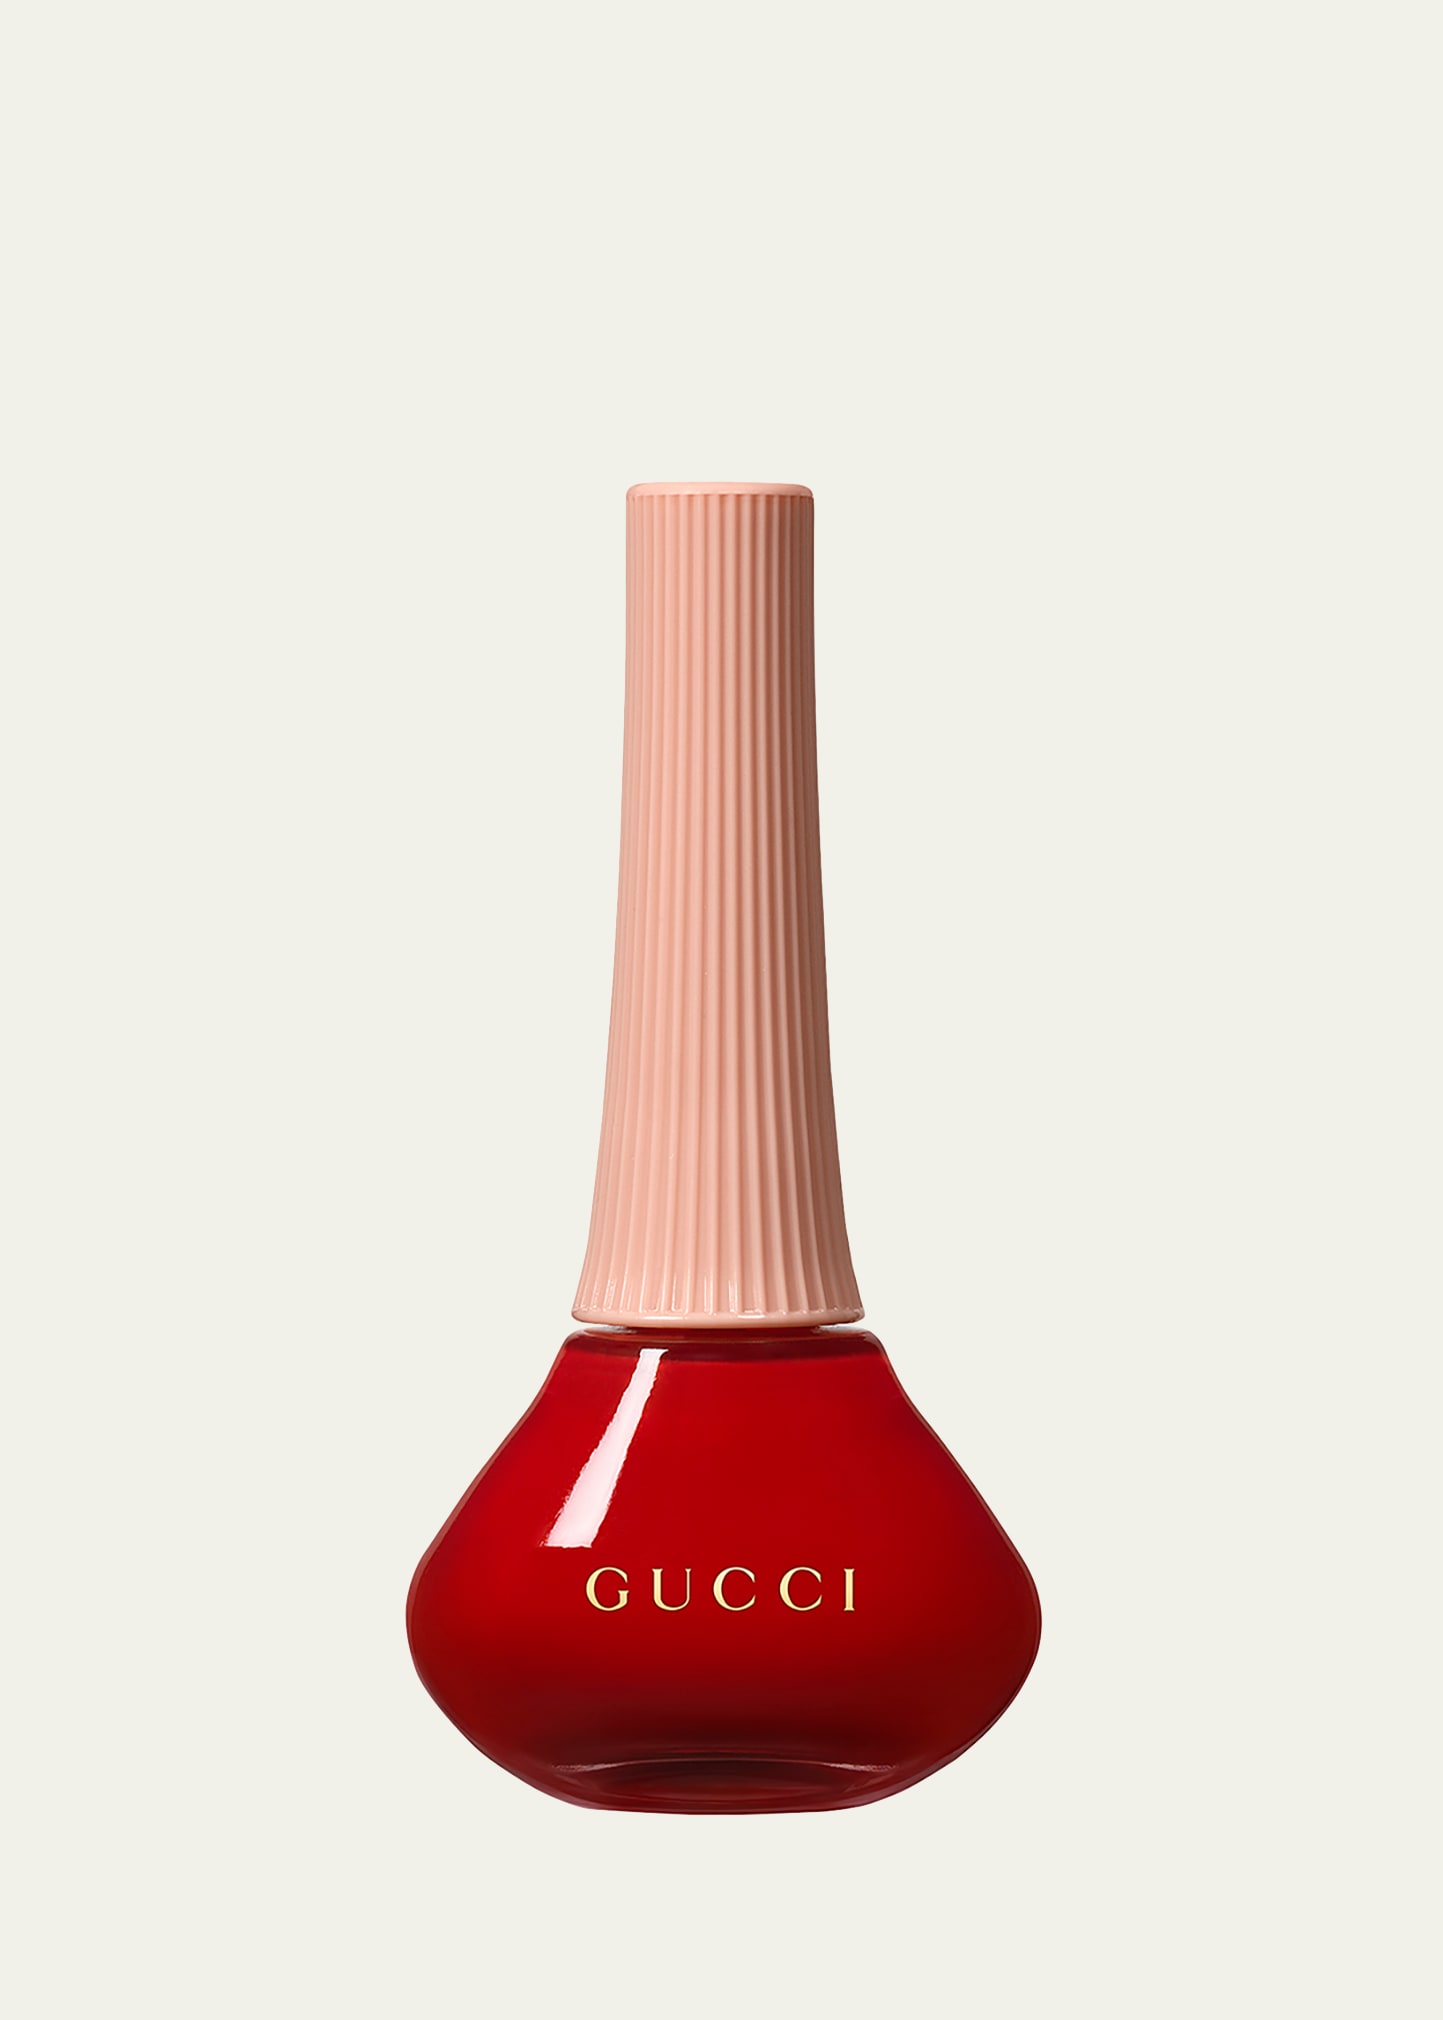 Gucci Vernis A Ongles Nail Varnish In Goldie Red